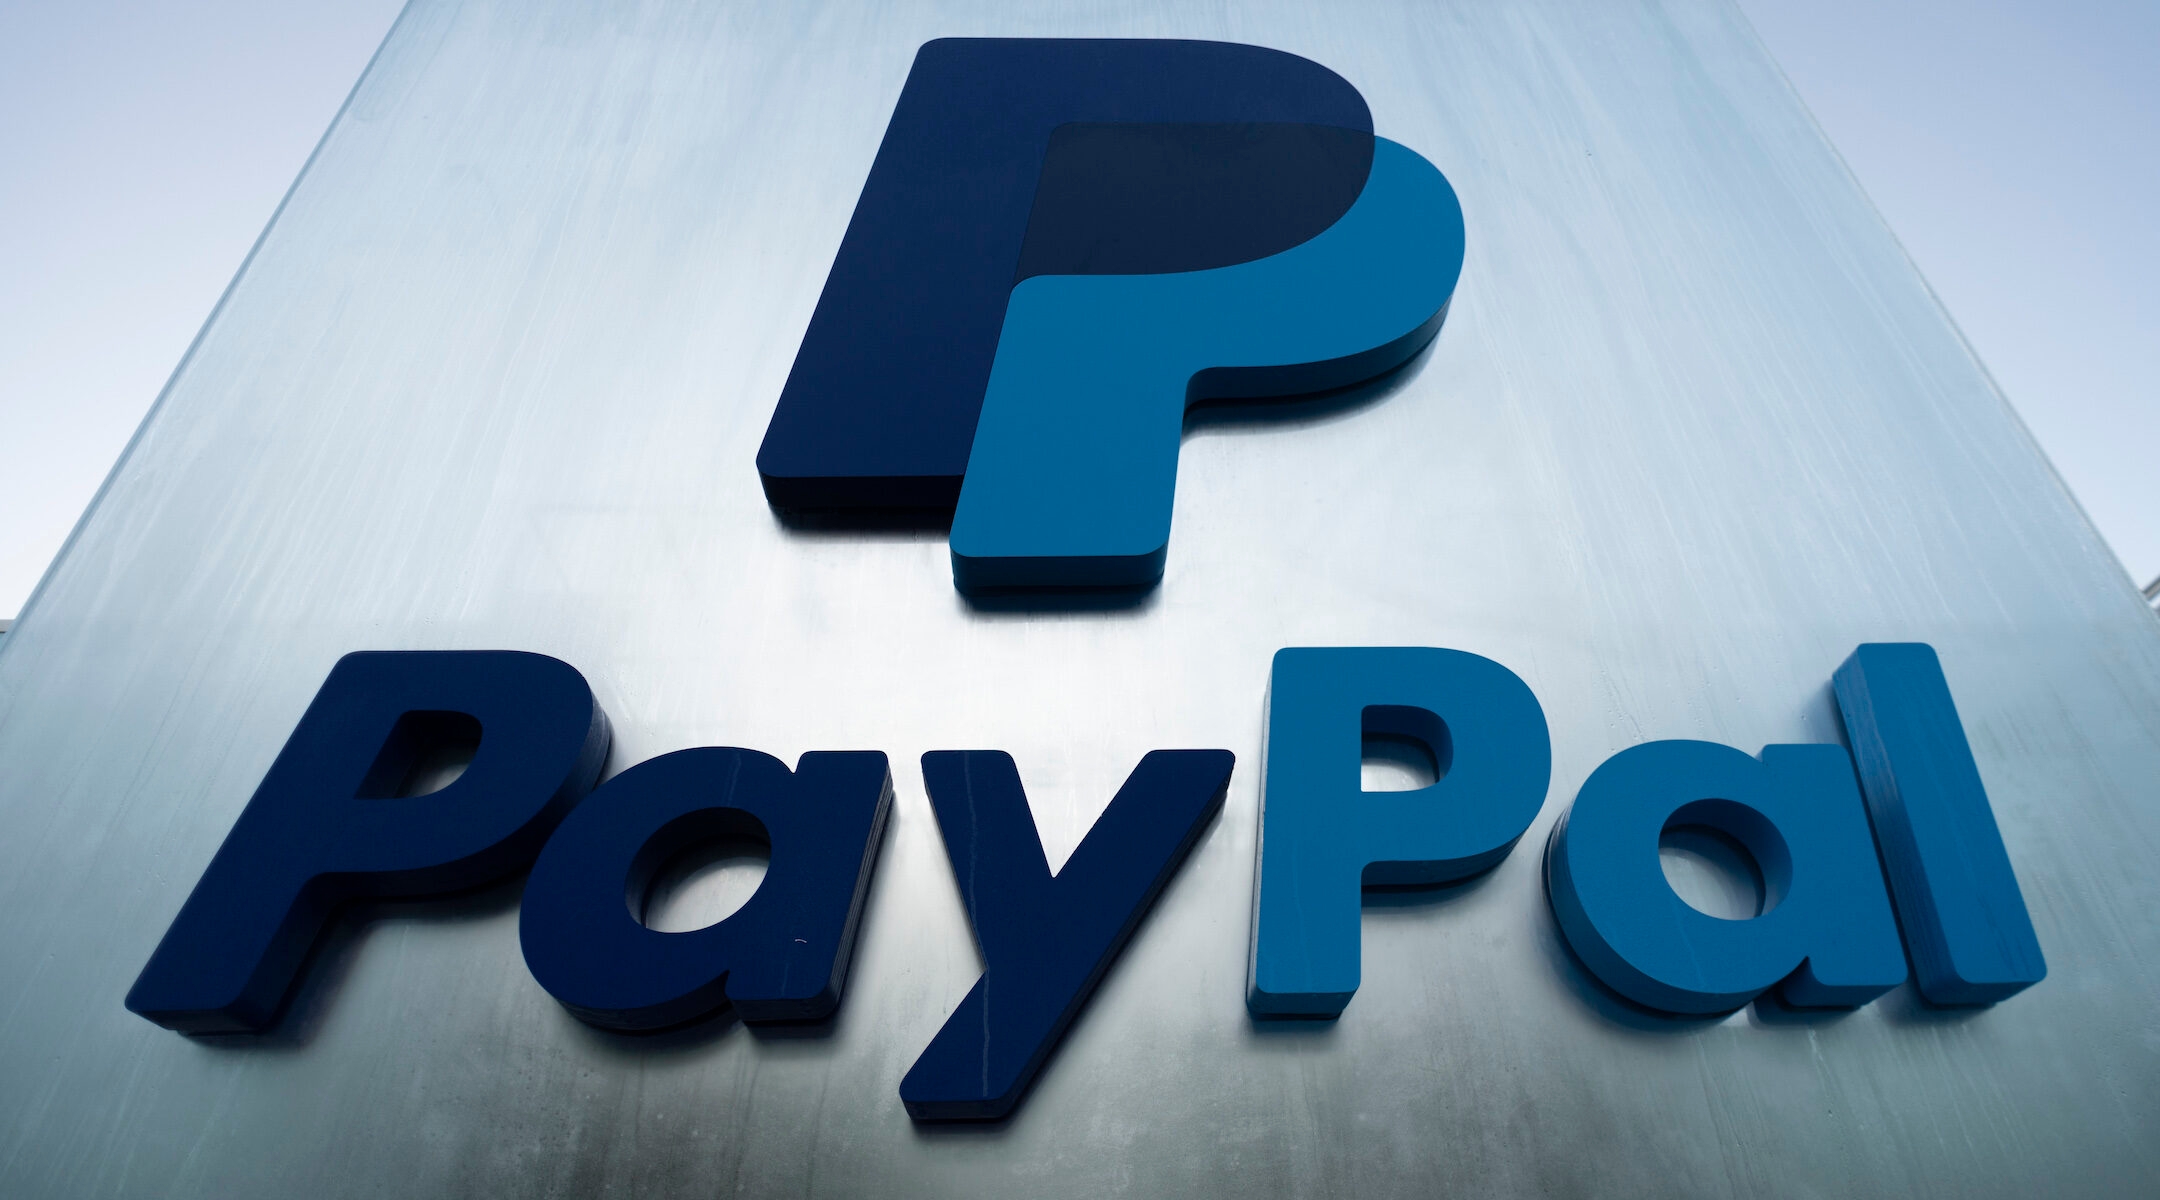 The PayPal office